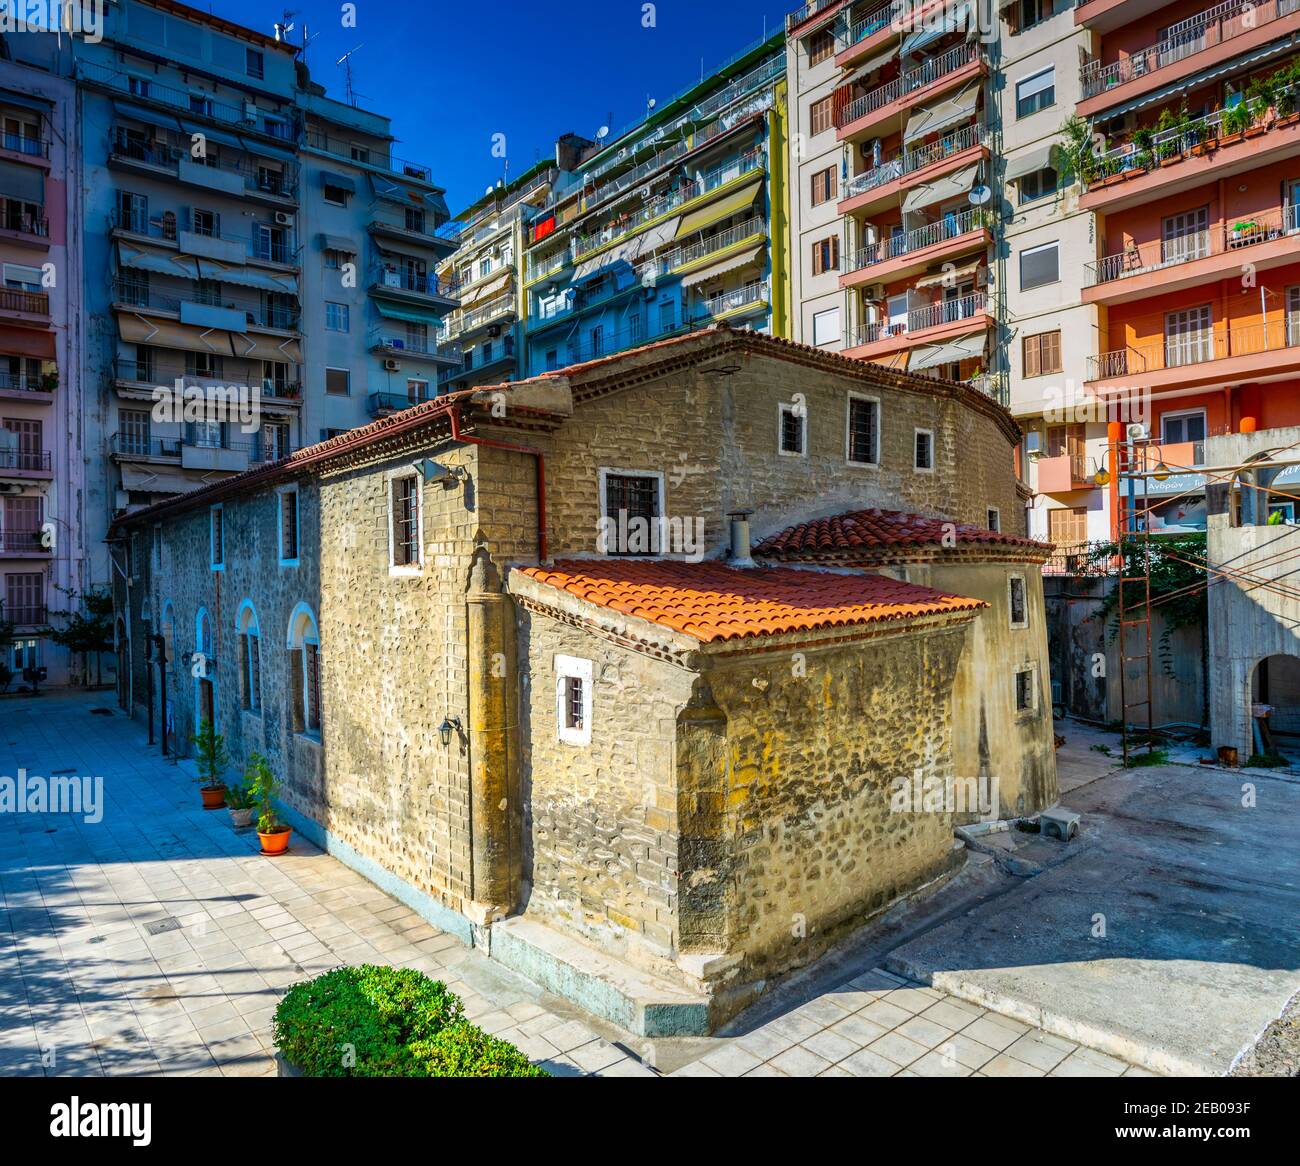 THESSALONIKI, GREECE, SEPTEMBER 8, 2017: Church surrounded by buildings in Thessaloniki, Greece Stock Photo